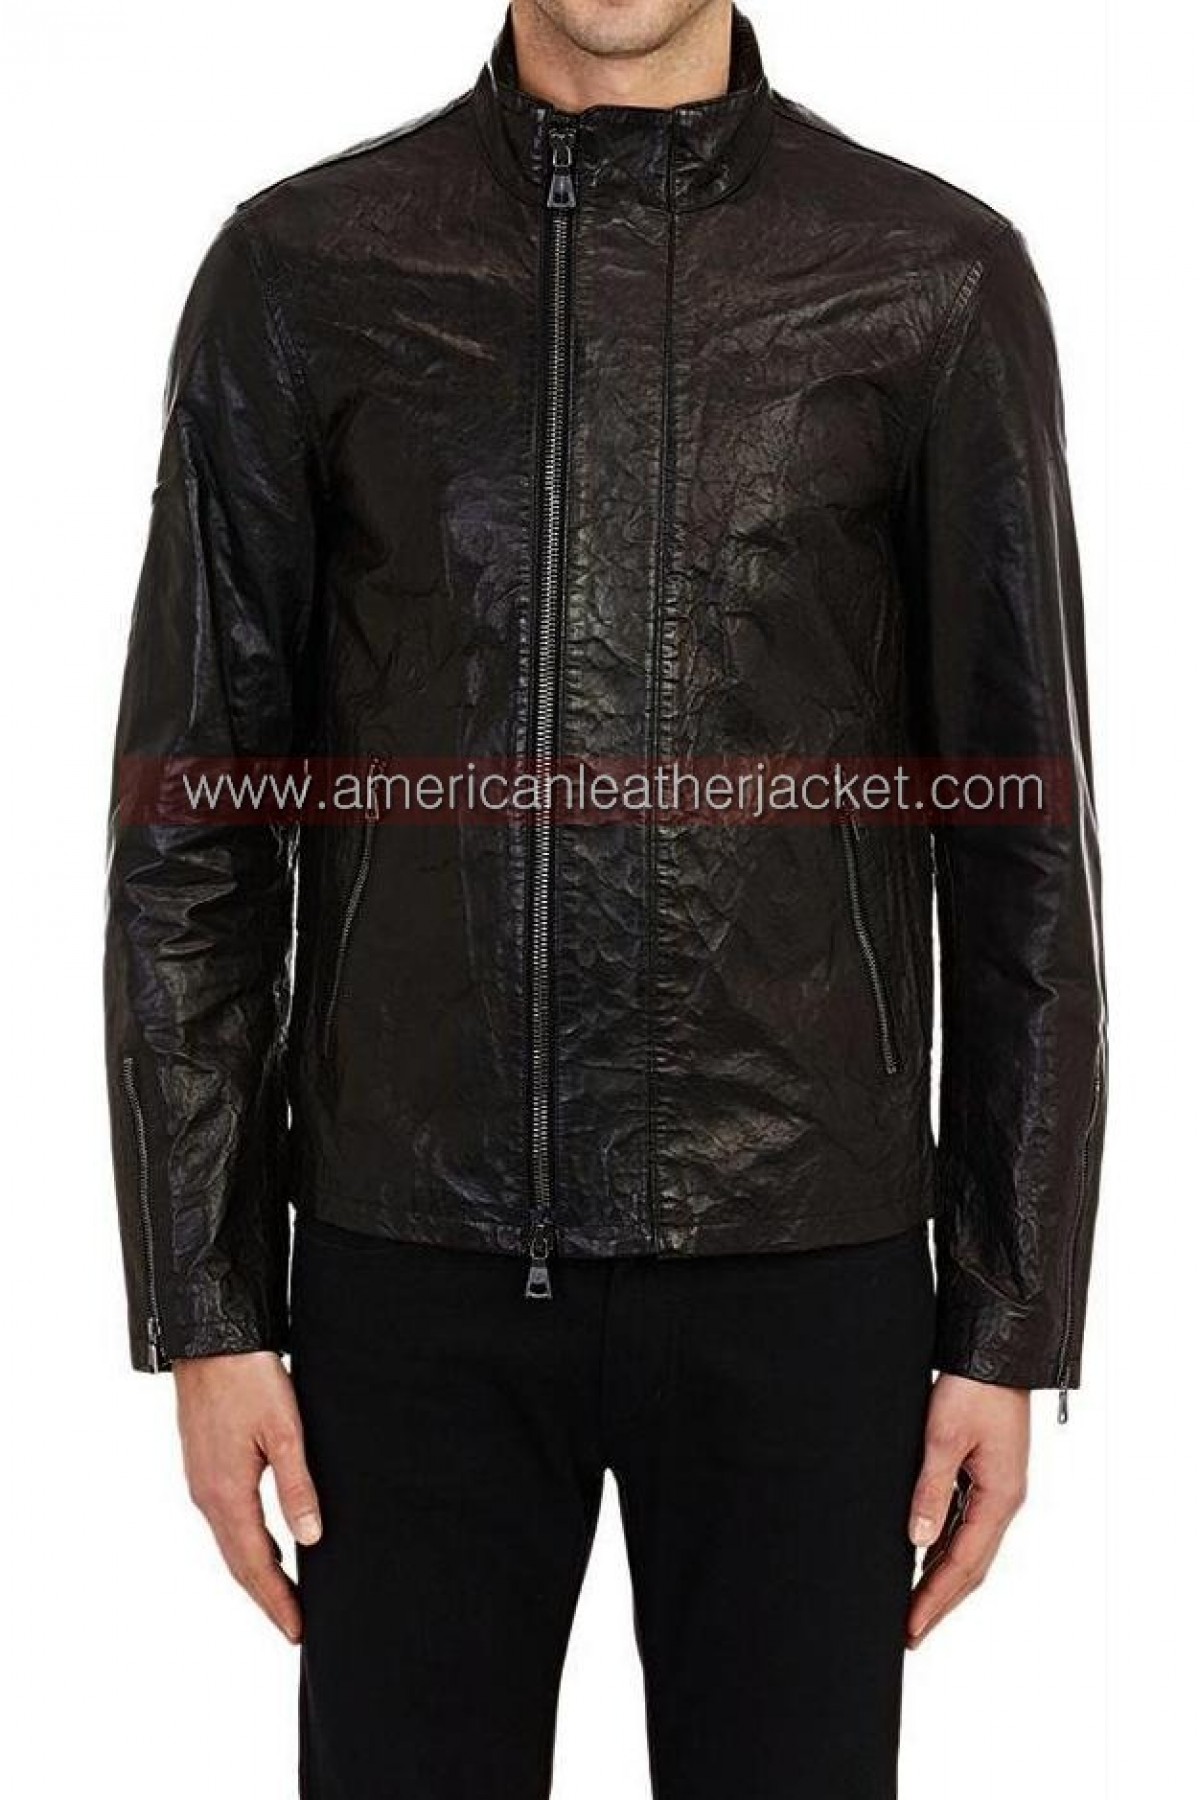 Tom Cruise Mission Impossible 5 Leather Jacket | Ethan Hunt Outfit